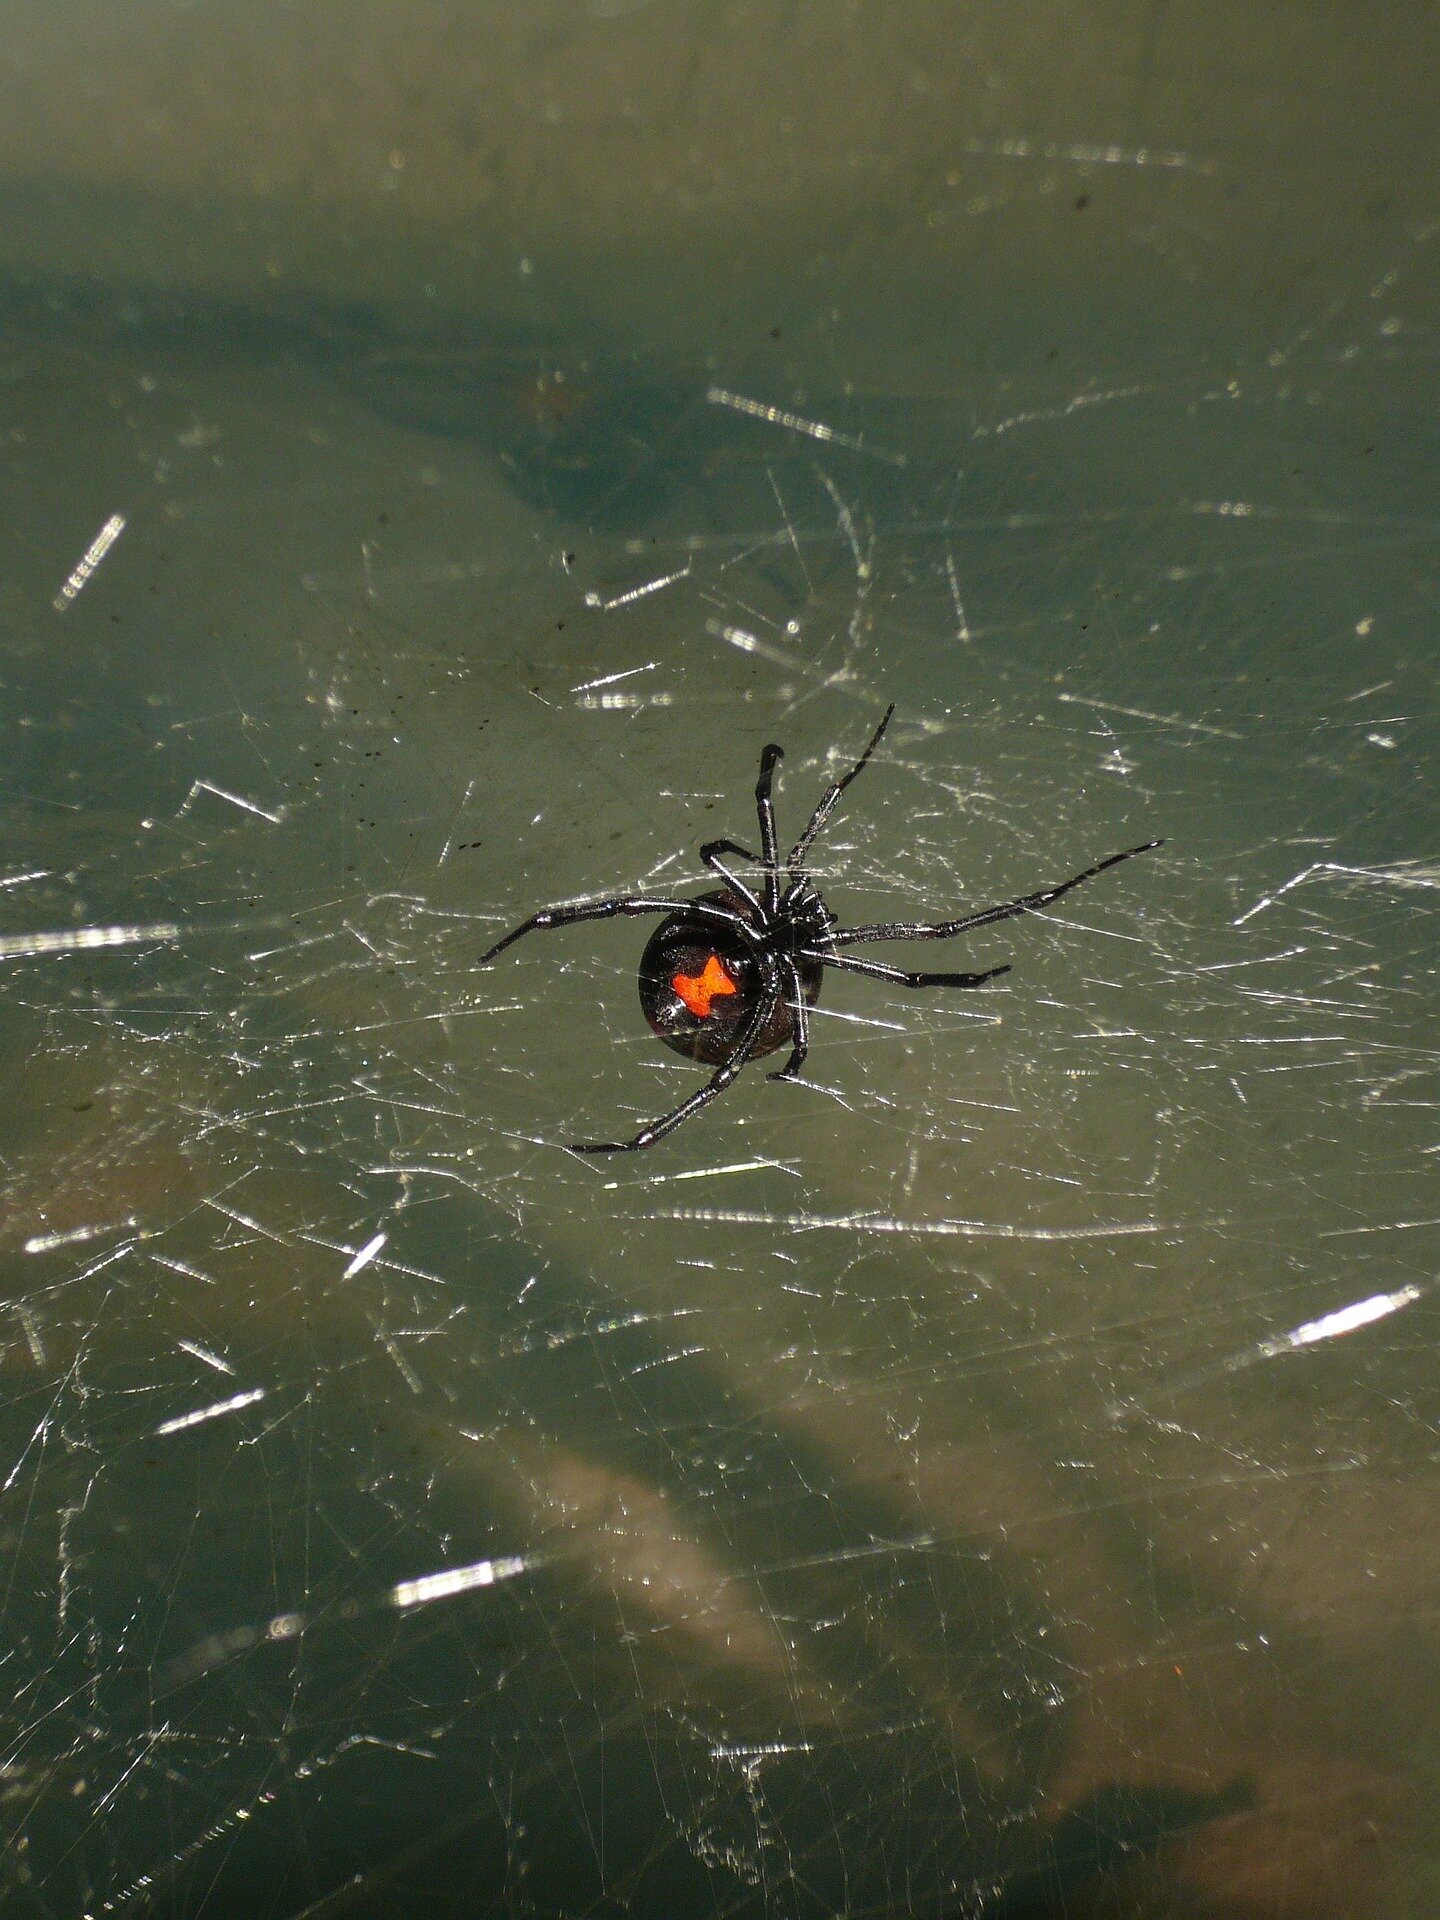 #Scientists engineer human antibodies that could neutralize black widow toxin